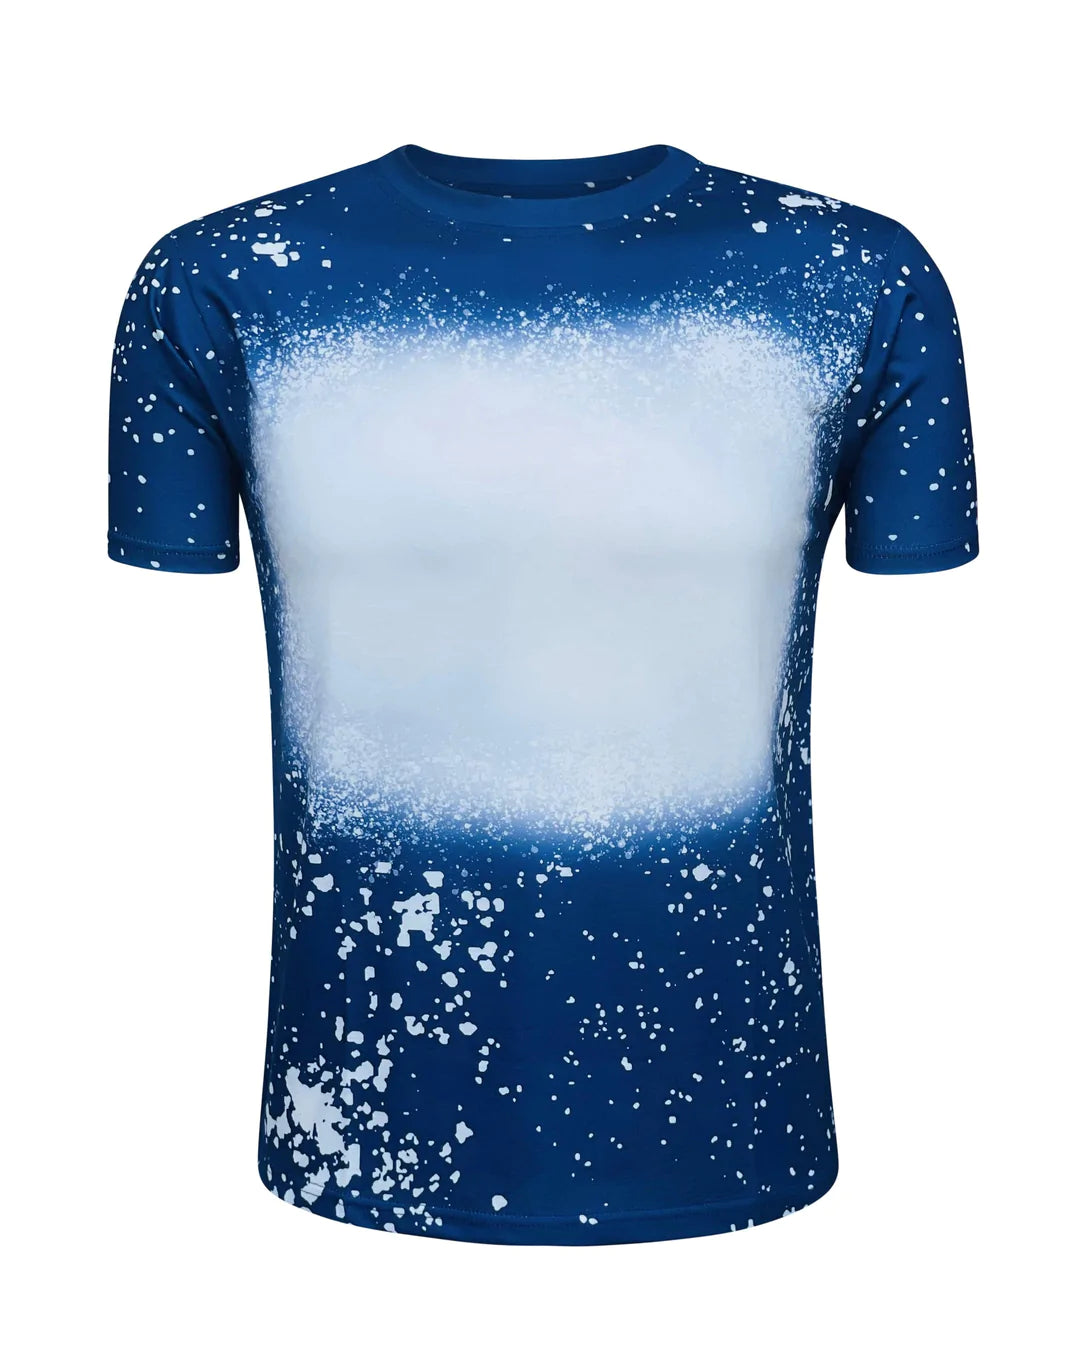 Can You Bleach 65% Polyester & 35% Cotton and use for Sublimation?